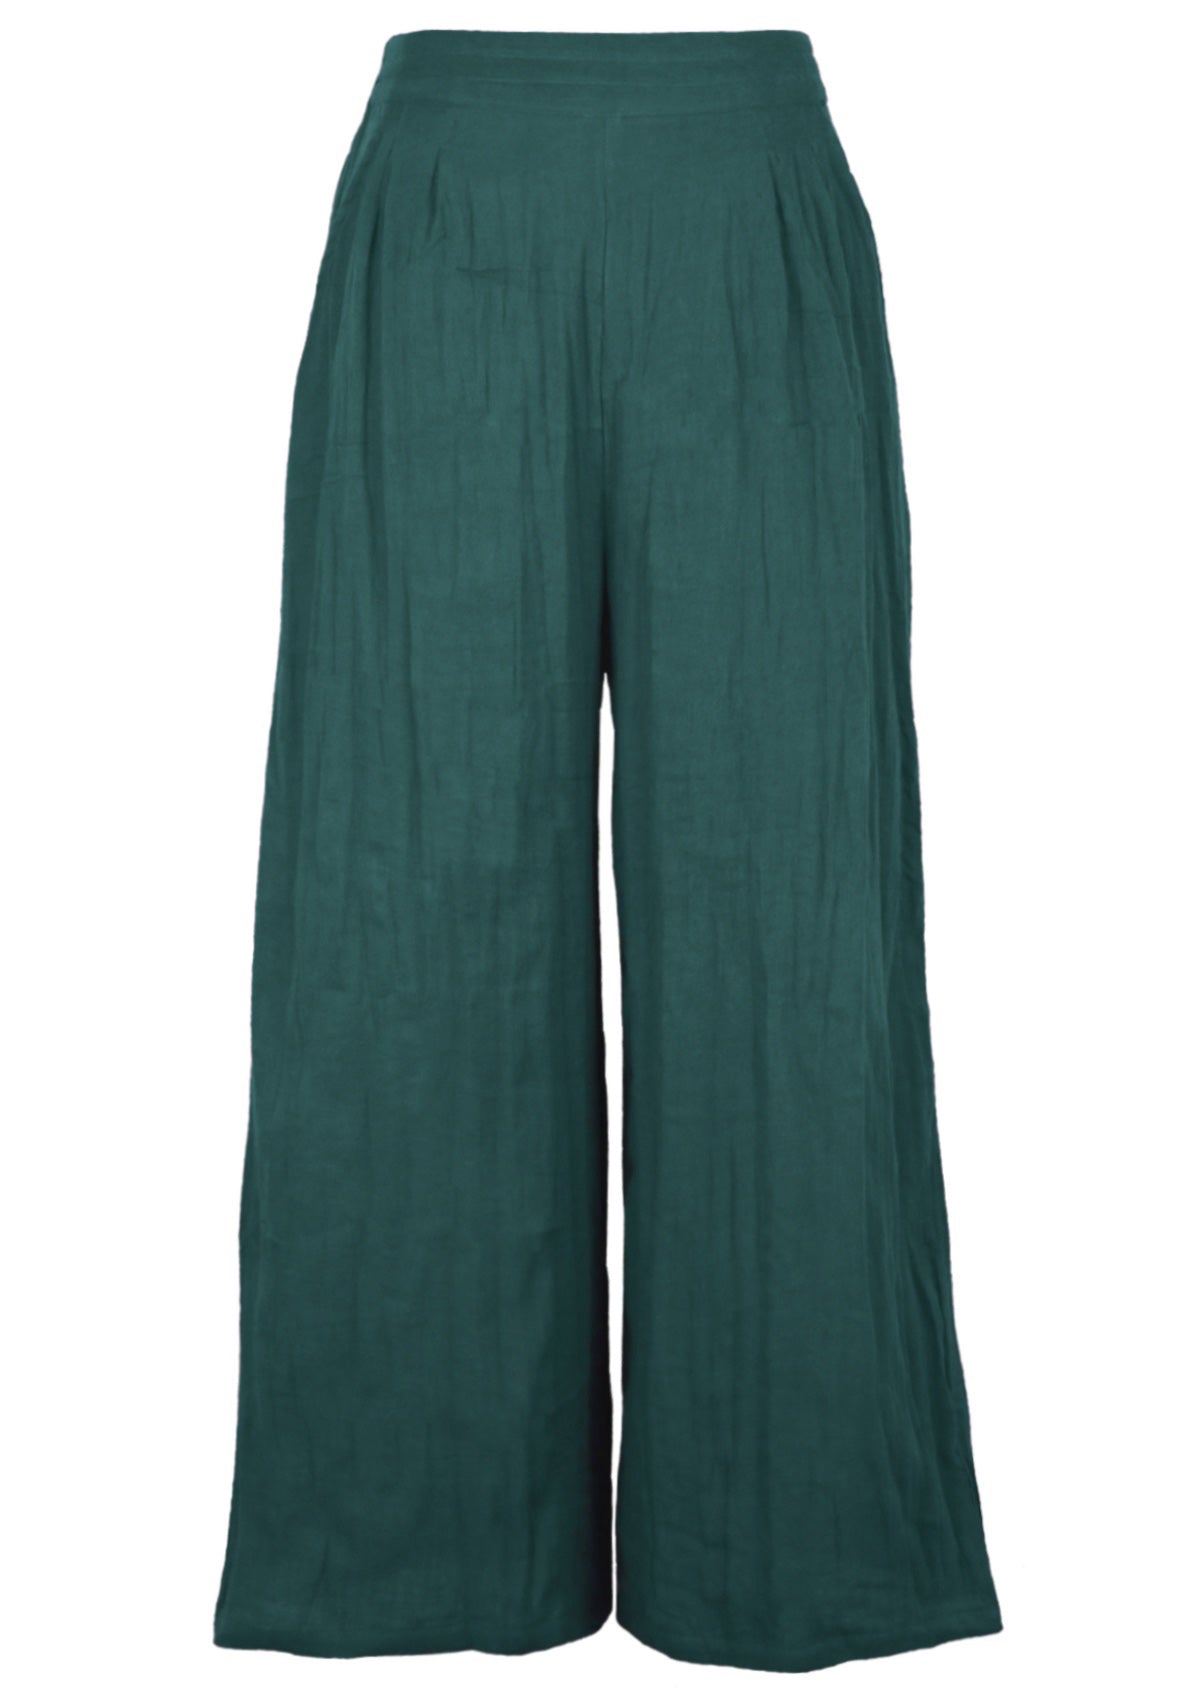 Deep teal cotton gauze pants with flat waistband at front